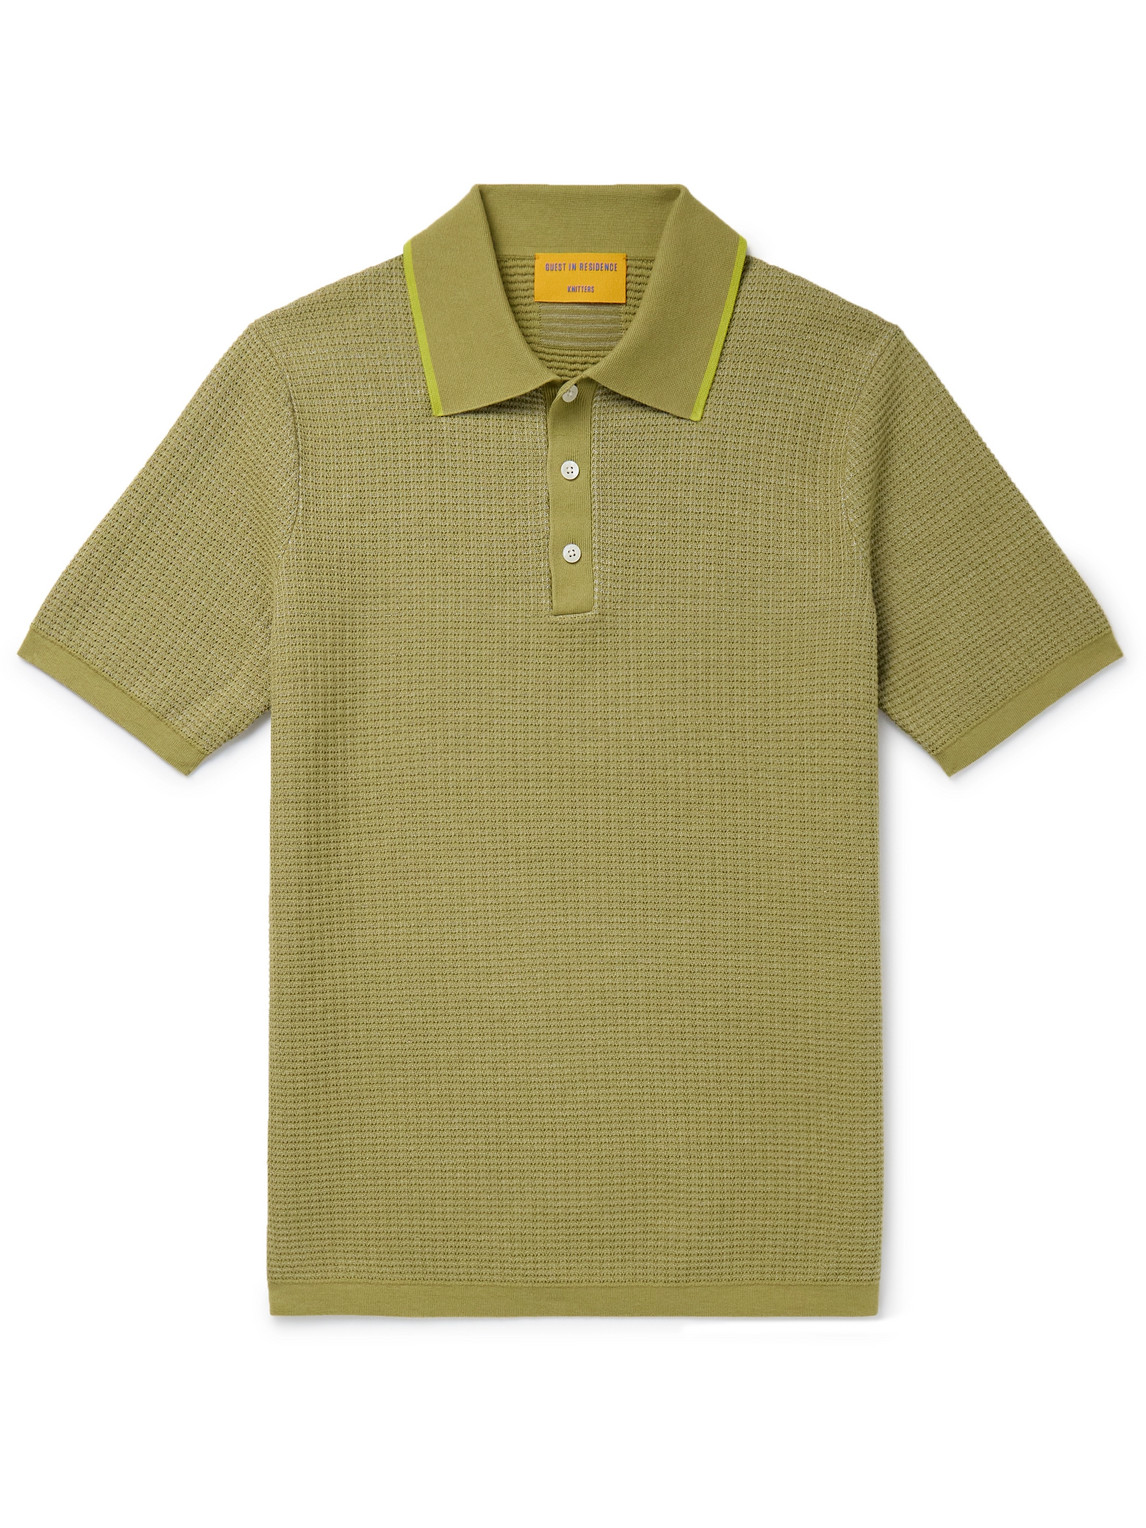 Guest In Residence - Striped Textured-Knit Cotton Polo Shirt - Men - Green - XL von Guest In Residence